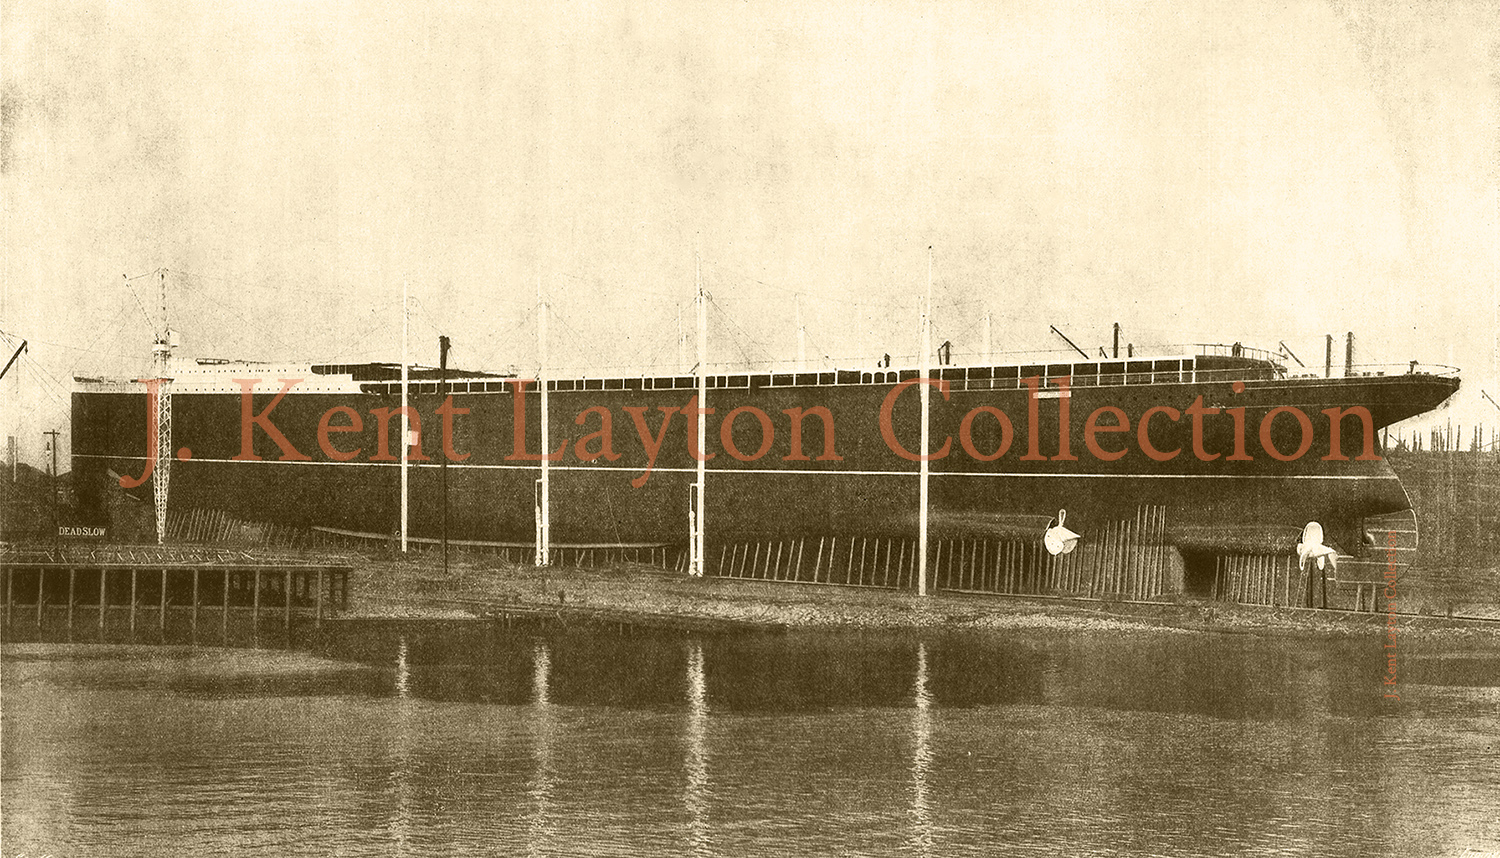 Viewed from the Clyde, the Lusitania dwarfs the river in this view of the ship shortly before she was ready to launch. (J. Kent Layton Collection)